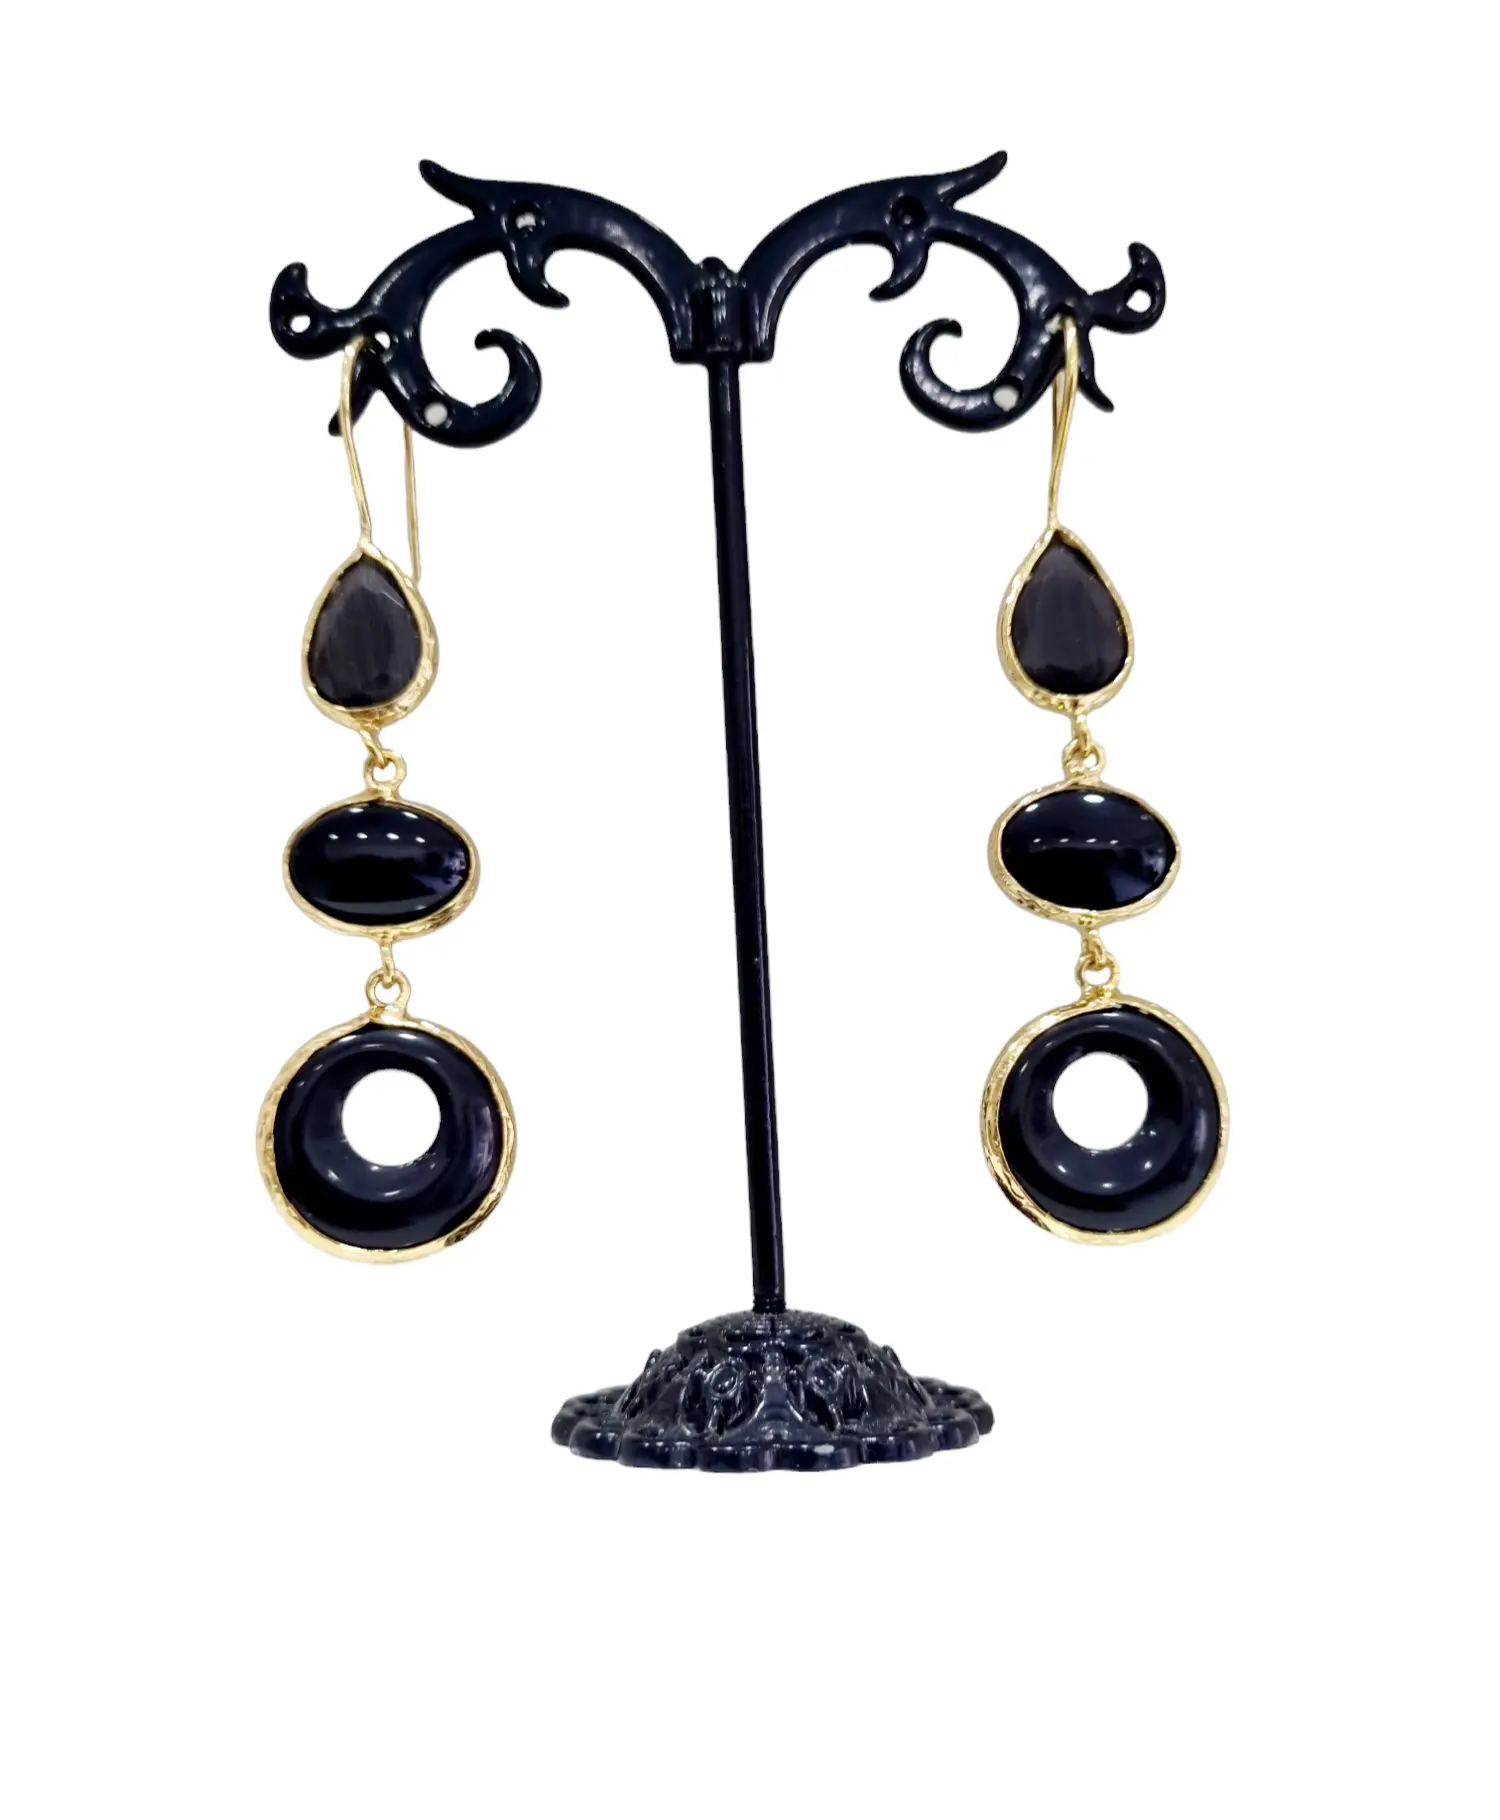 Onyx and Cat's Eye Earrings with Brass – Length 6.5cm, Weight 5.7g